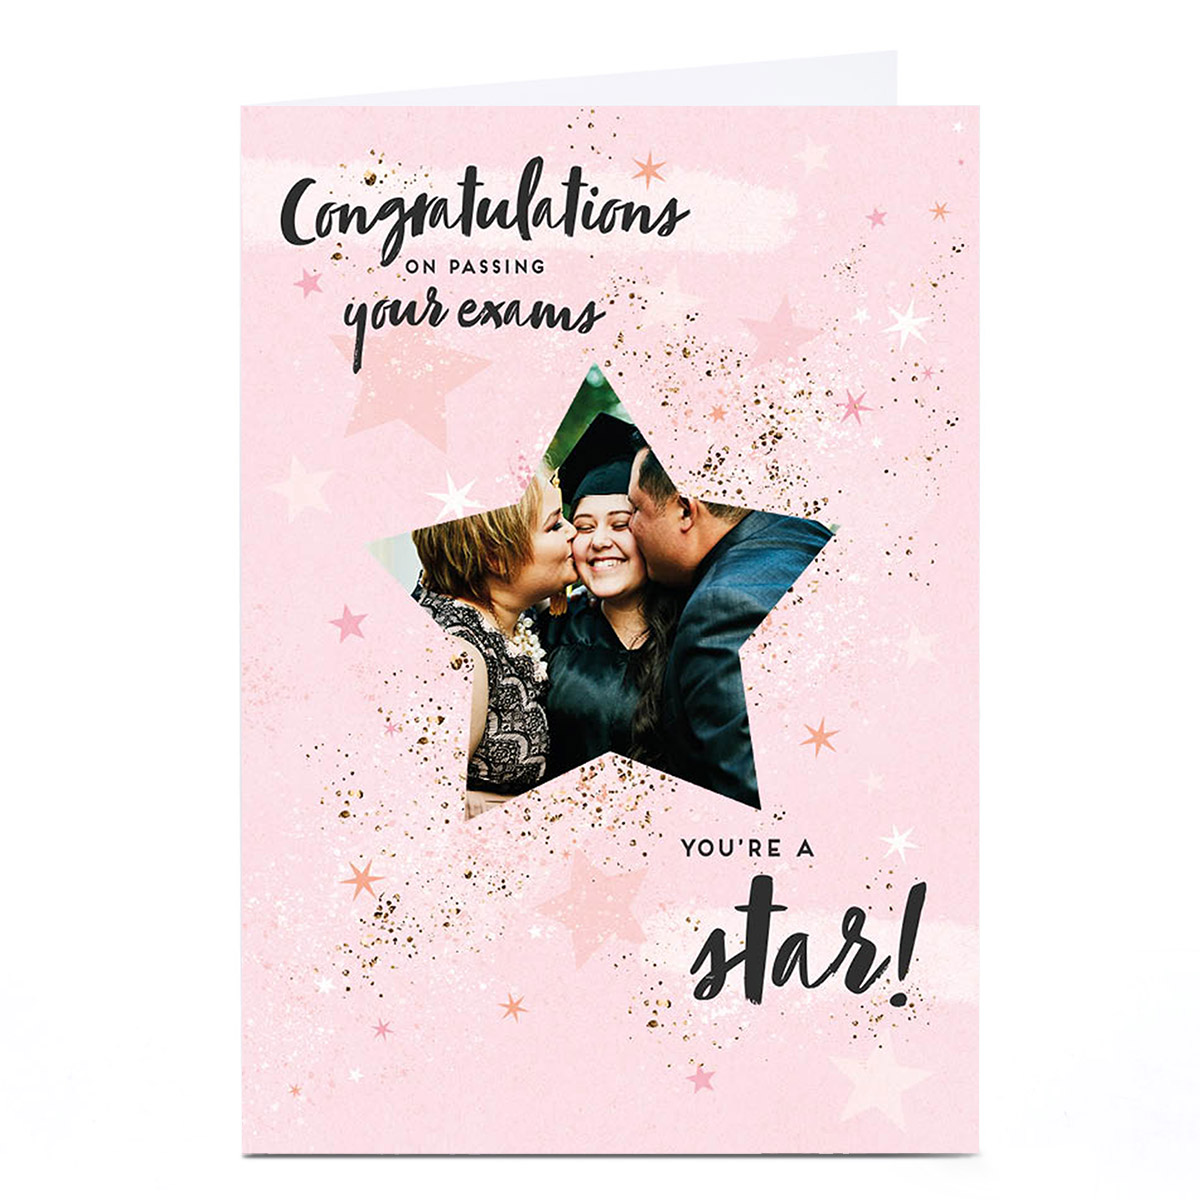 Photo Congratulations Card - Passing Your Exams